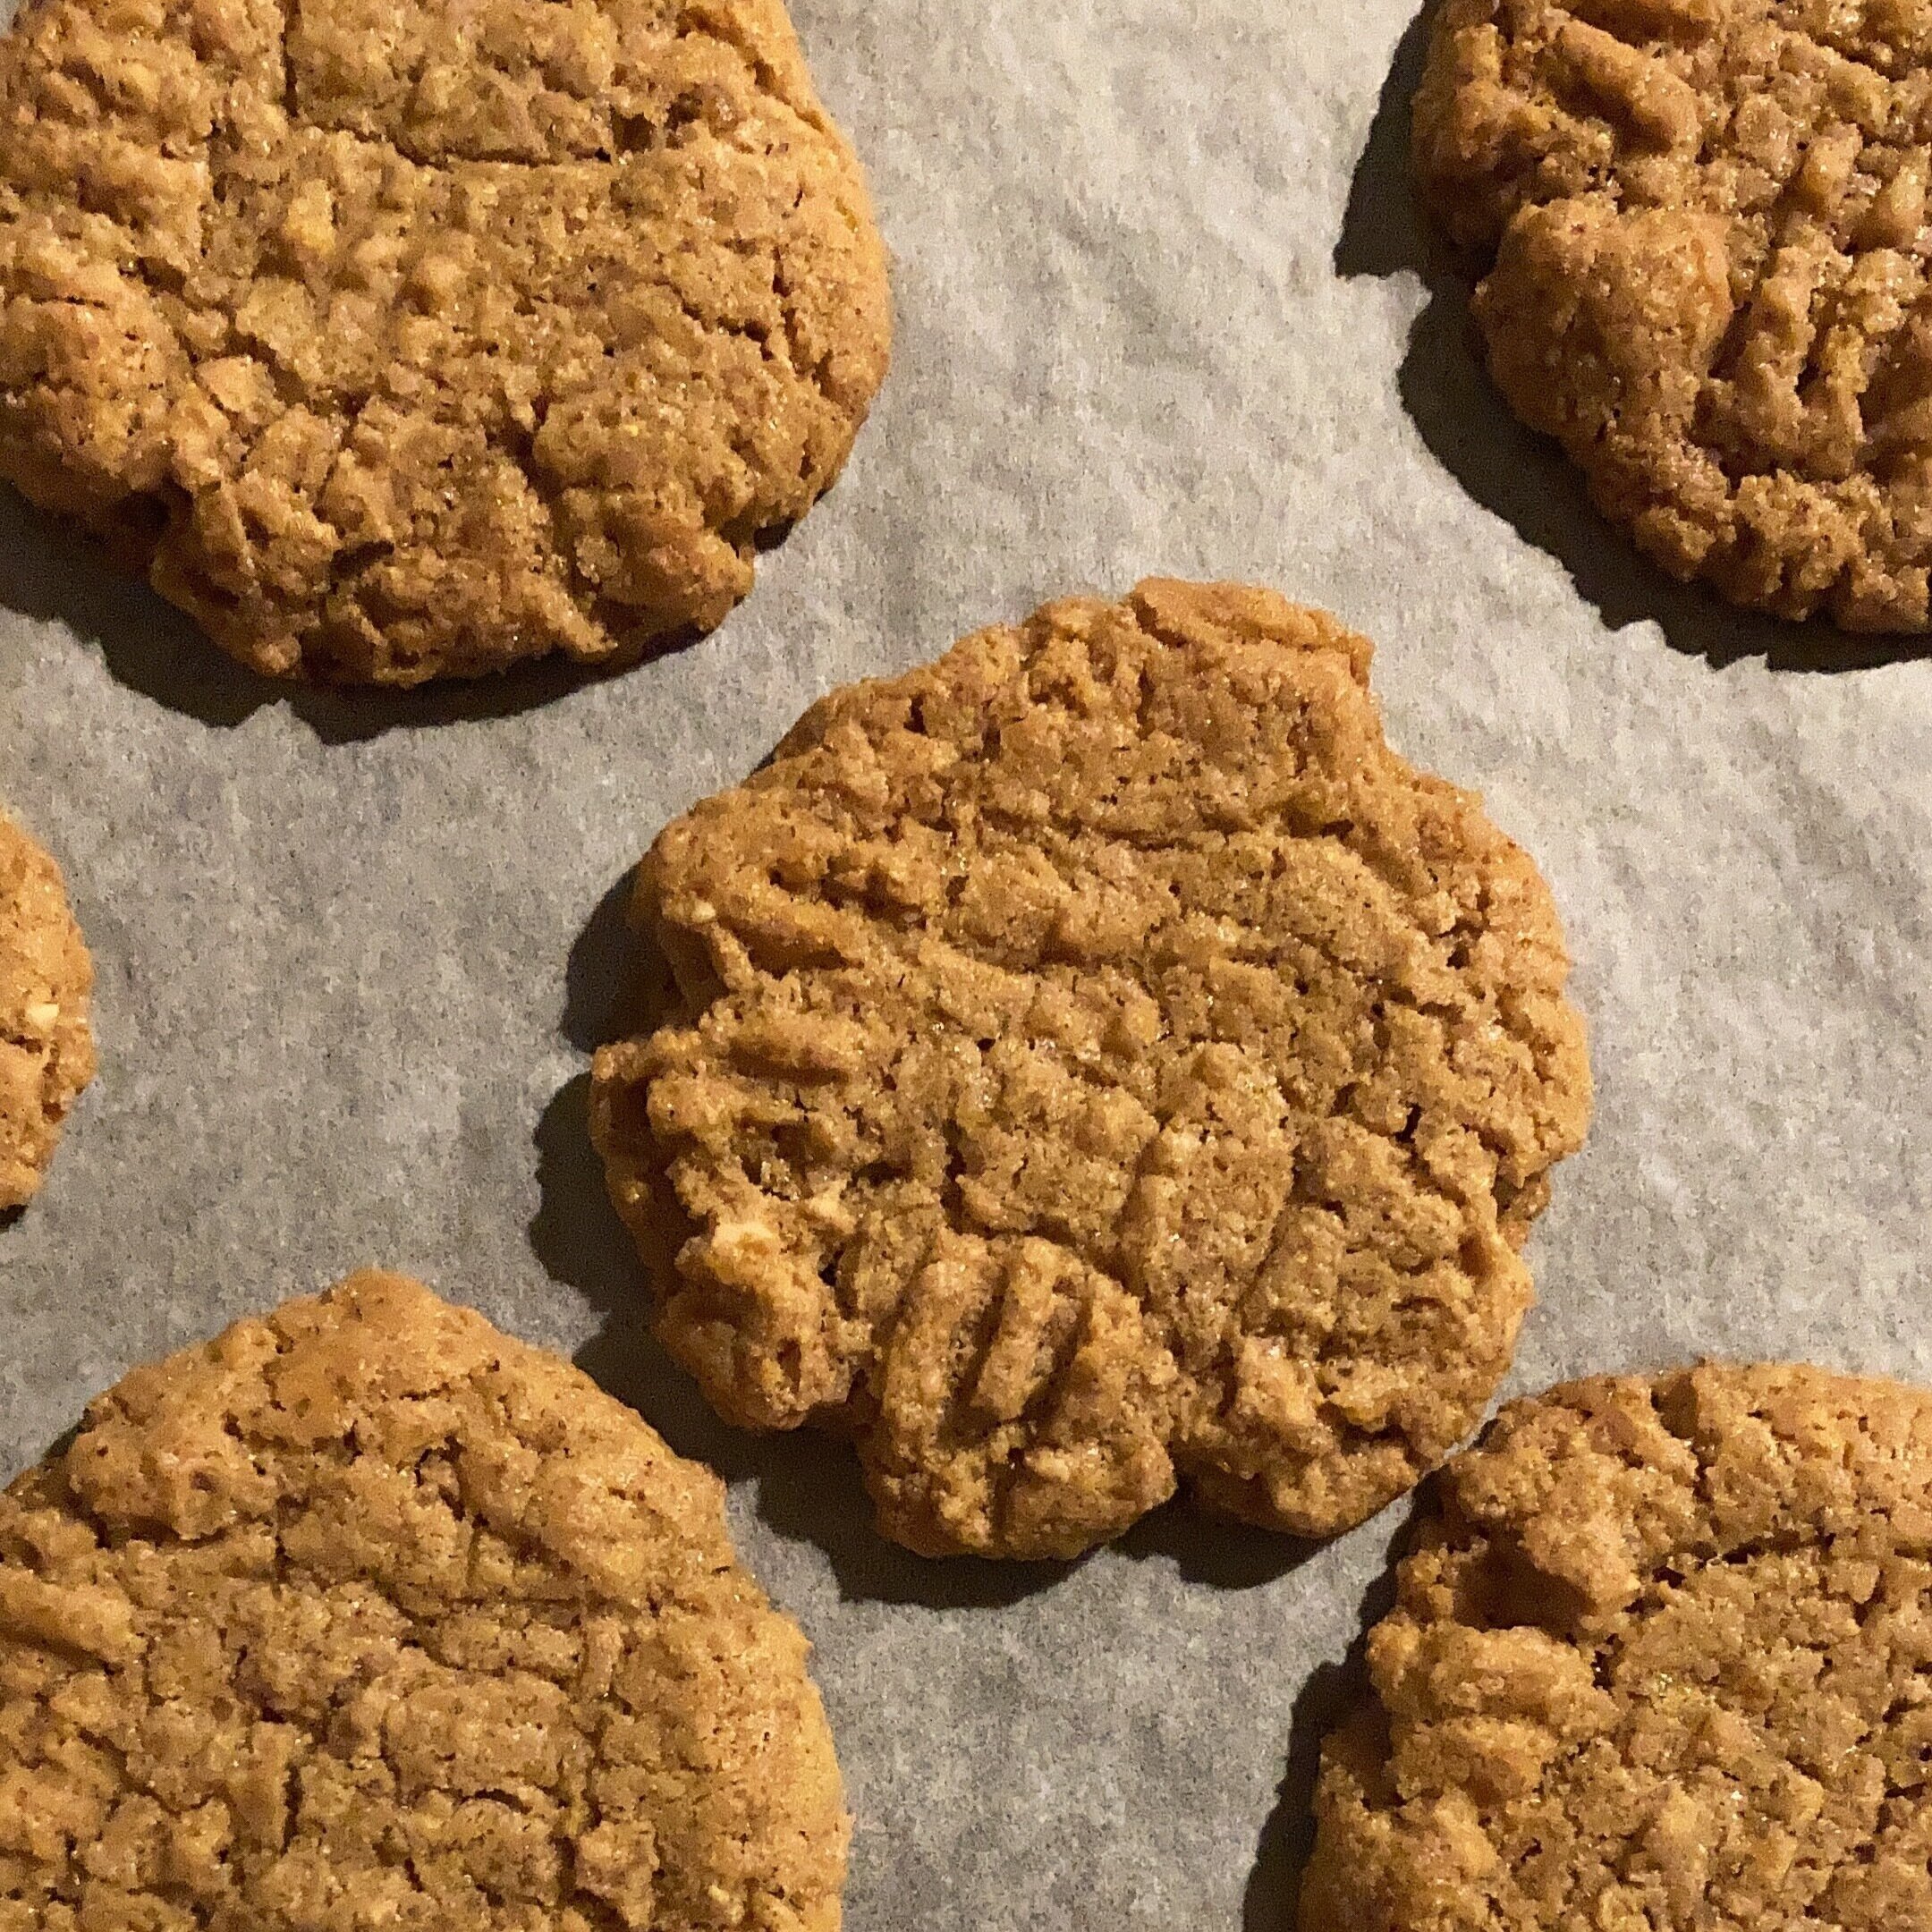 Fresh peanut butter cookies are always a good option.